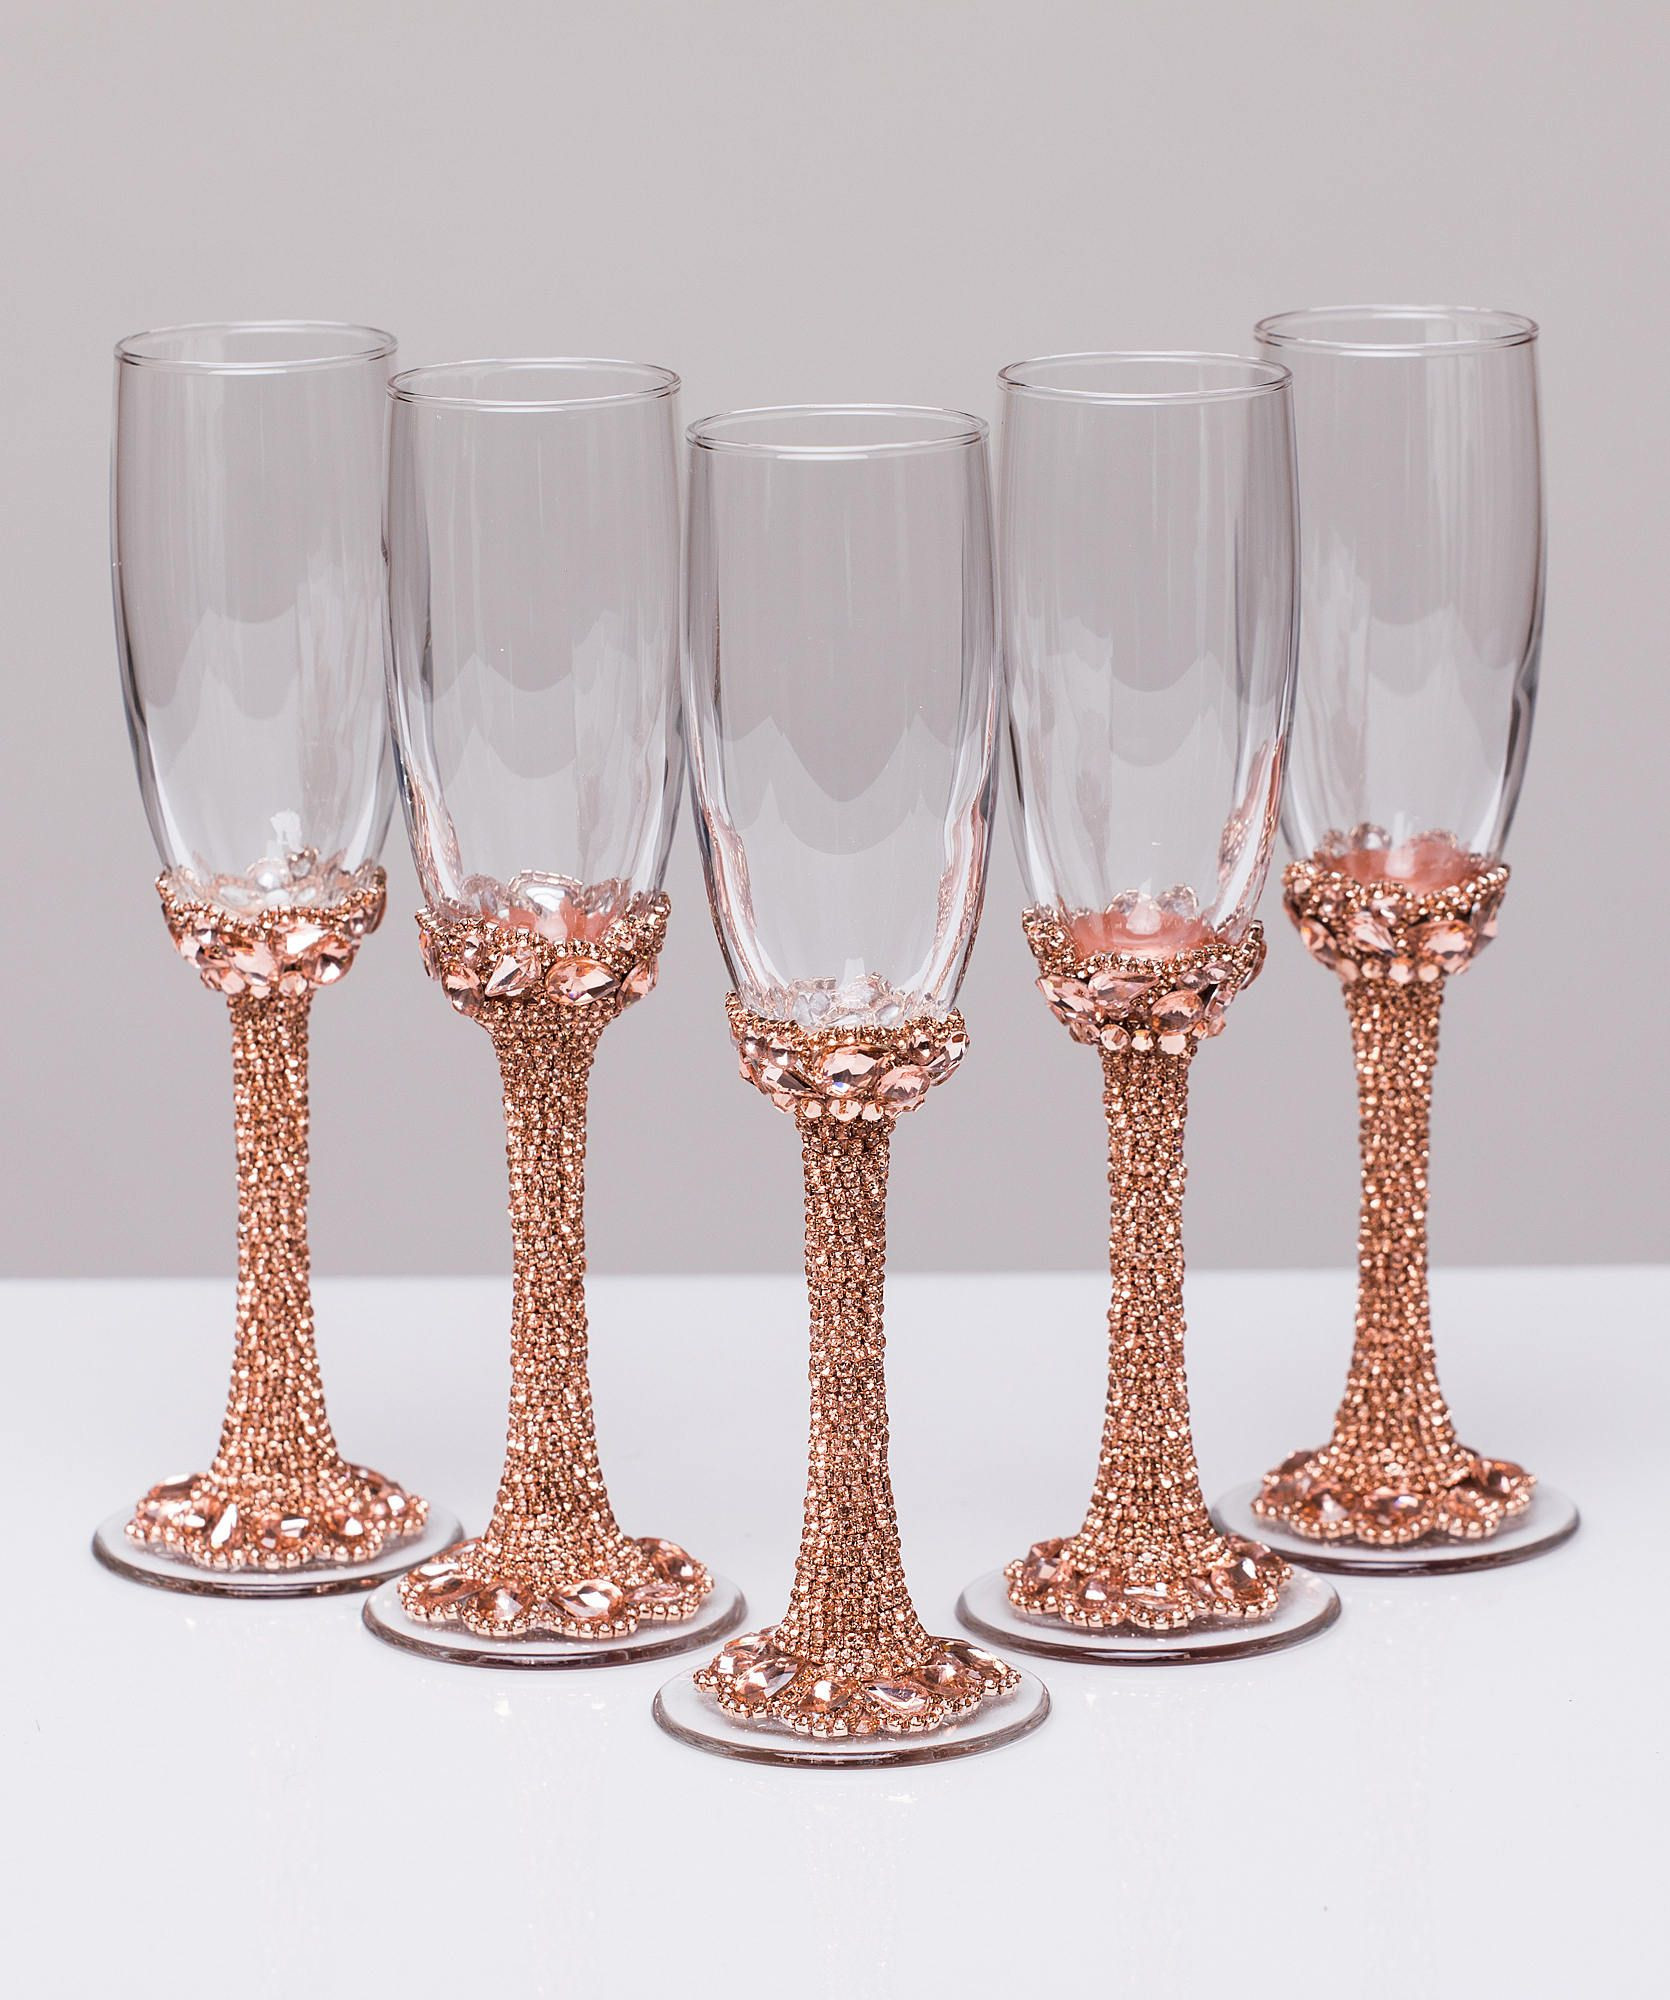 20 Popular Personalized Glass Vase 2024 free download personalized glass vase of personalized glasses rose gold champagne flutes wedding toasting throughout personalized glasses rose gold champagne flutes wedding